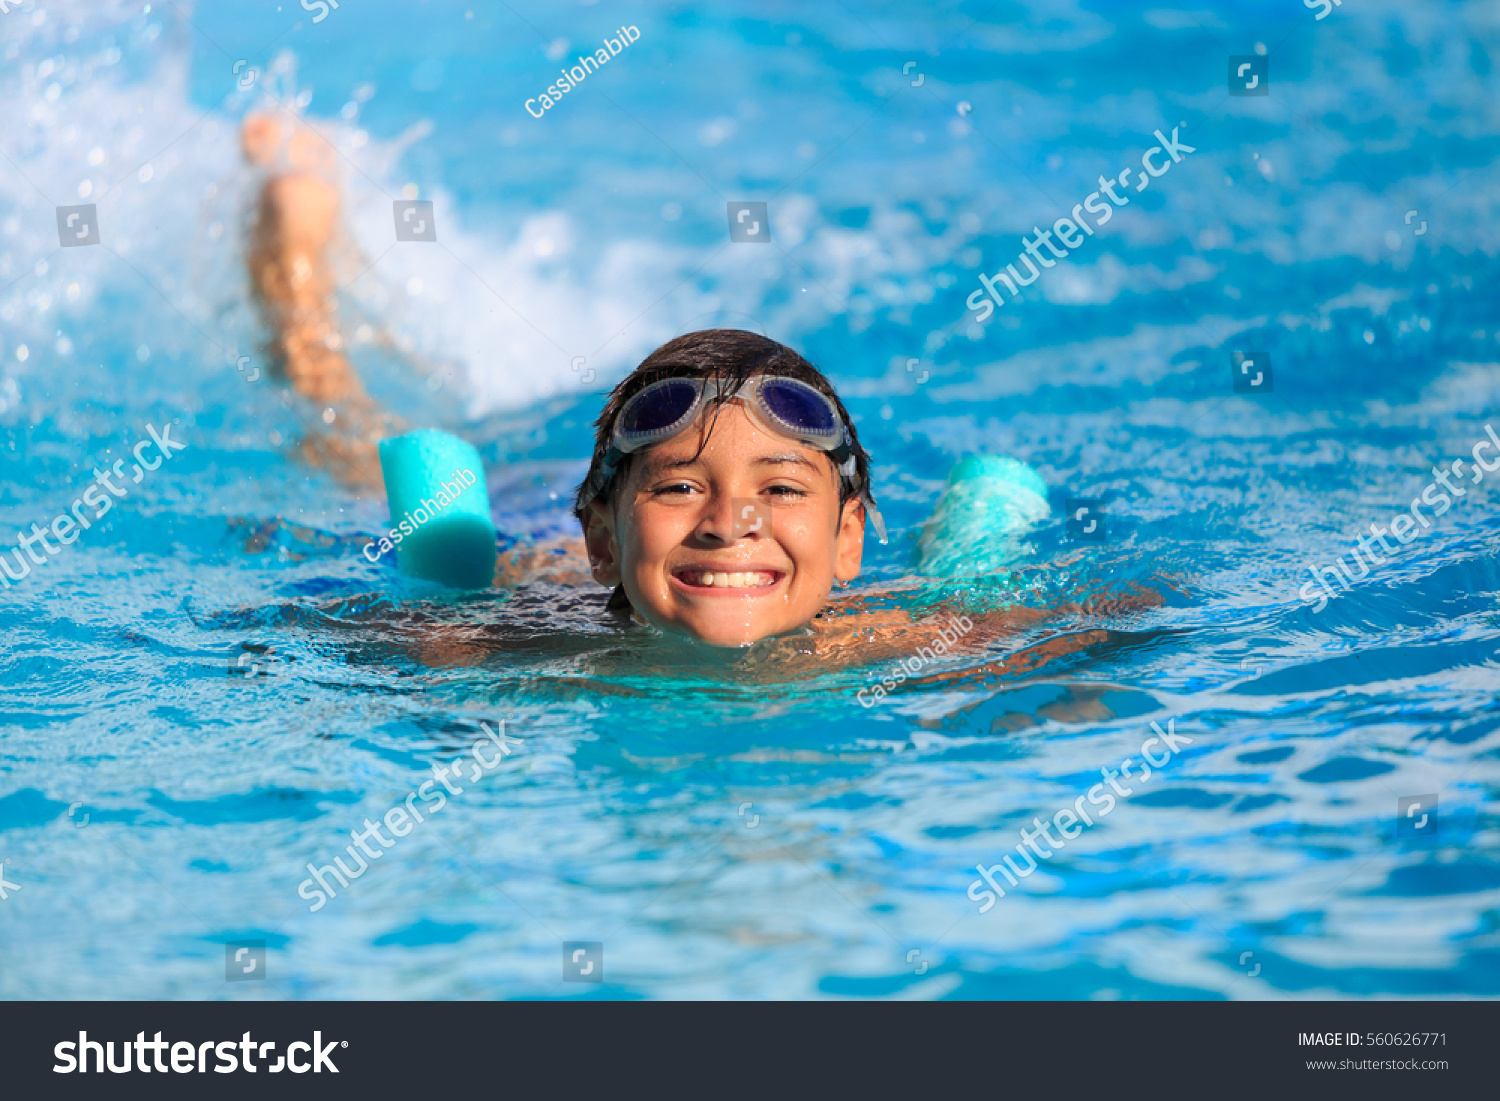 Boy happy swimming in a pool  #560626771